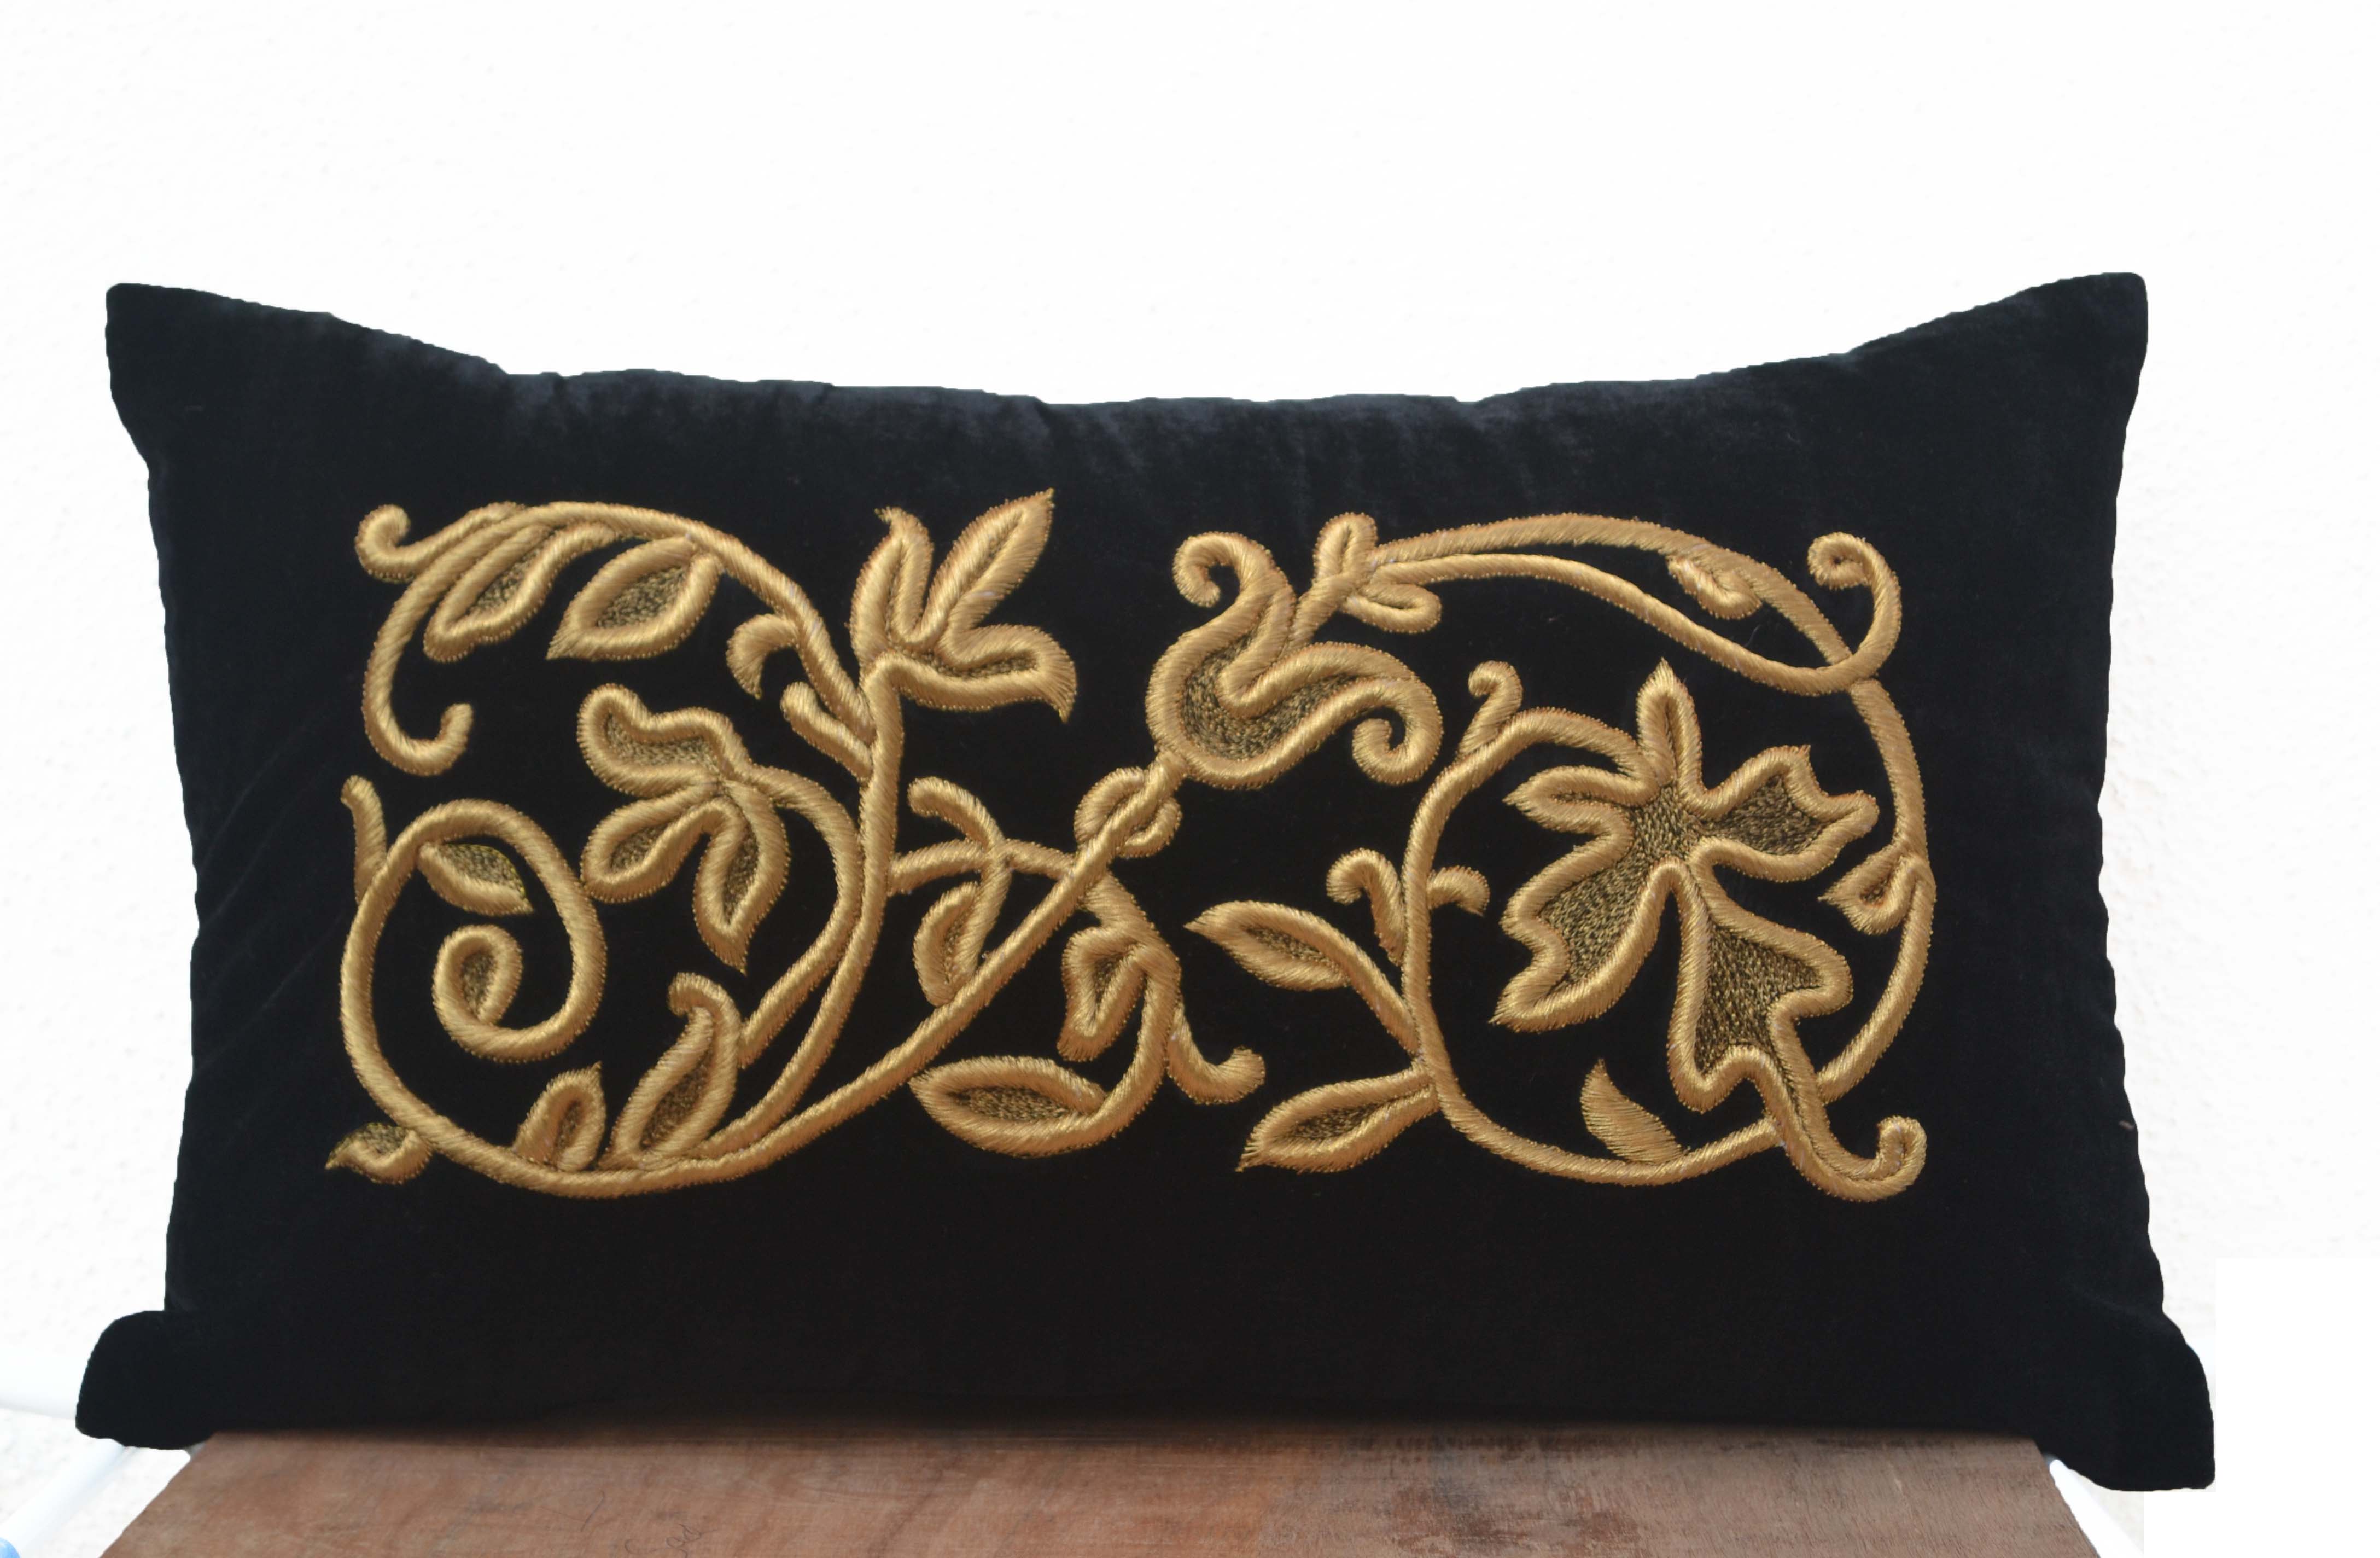 Amore Beaute pillow covers make a great gift for birthday, wedding, anniversary, housewarming, mother's day.